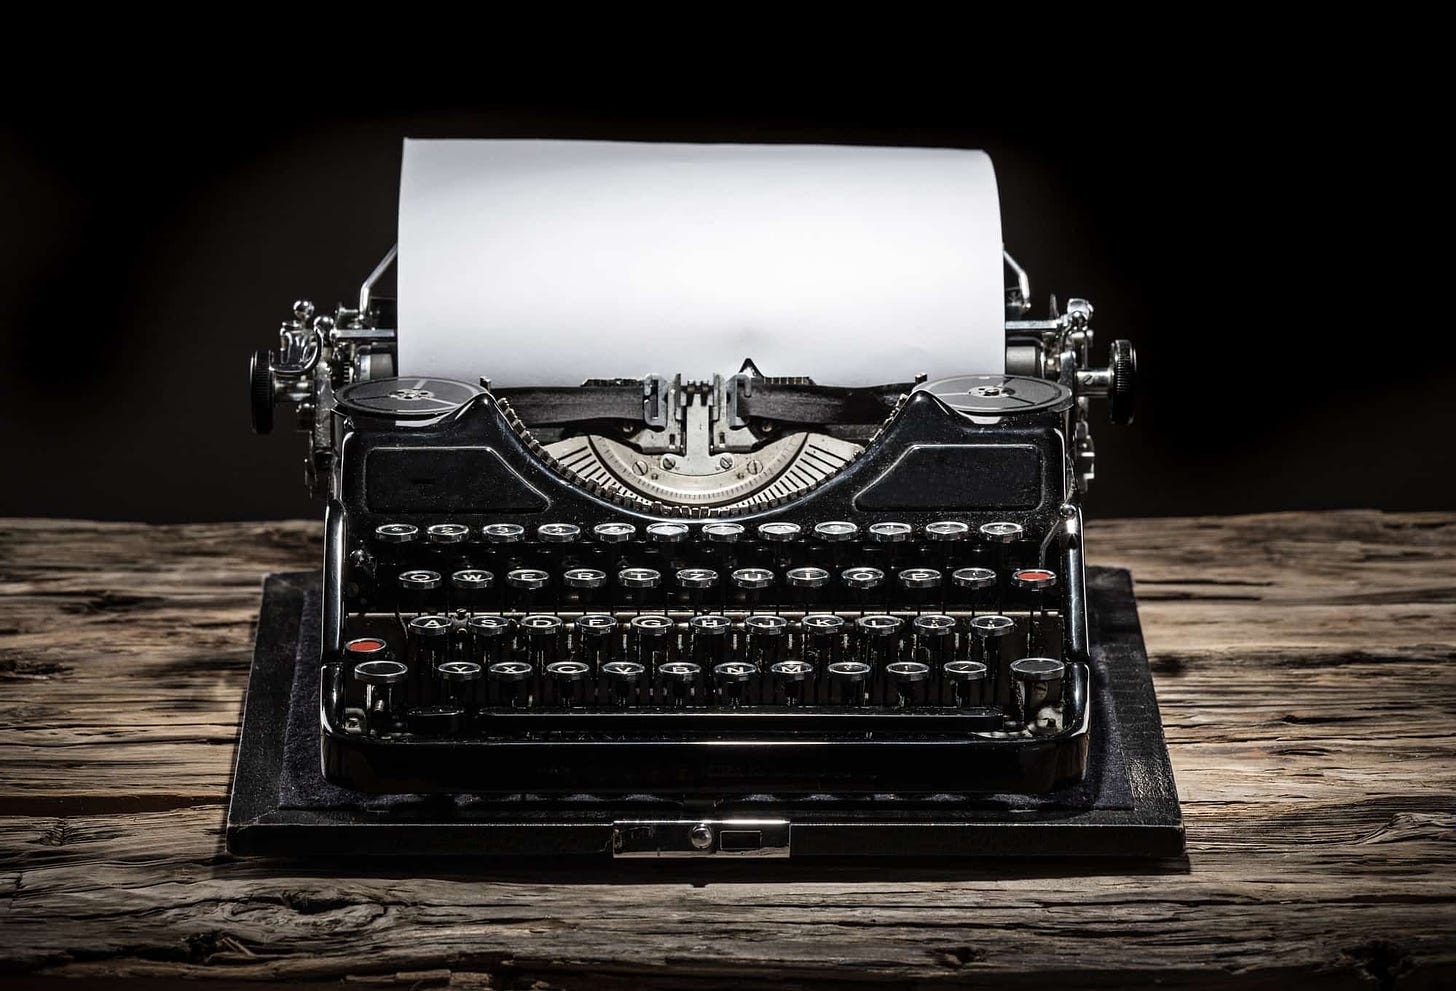 Top 7 Of The Best Antique-Inspired Vintage Typewriters